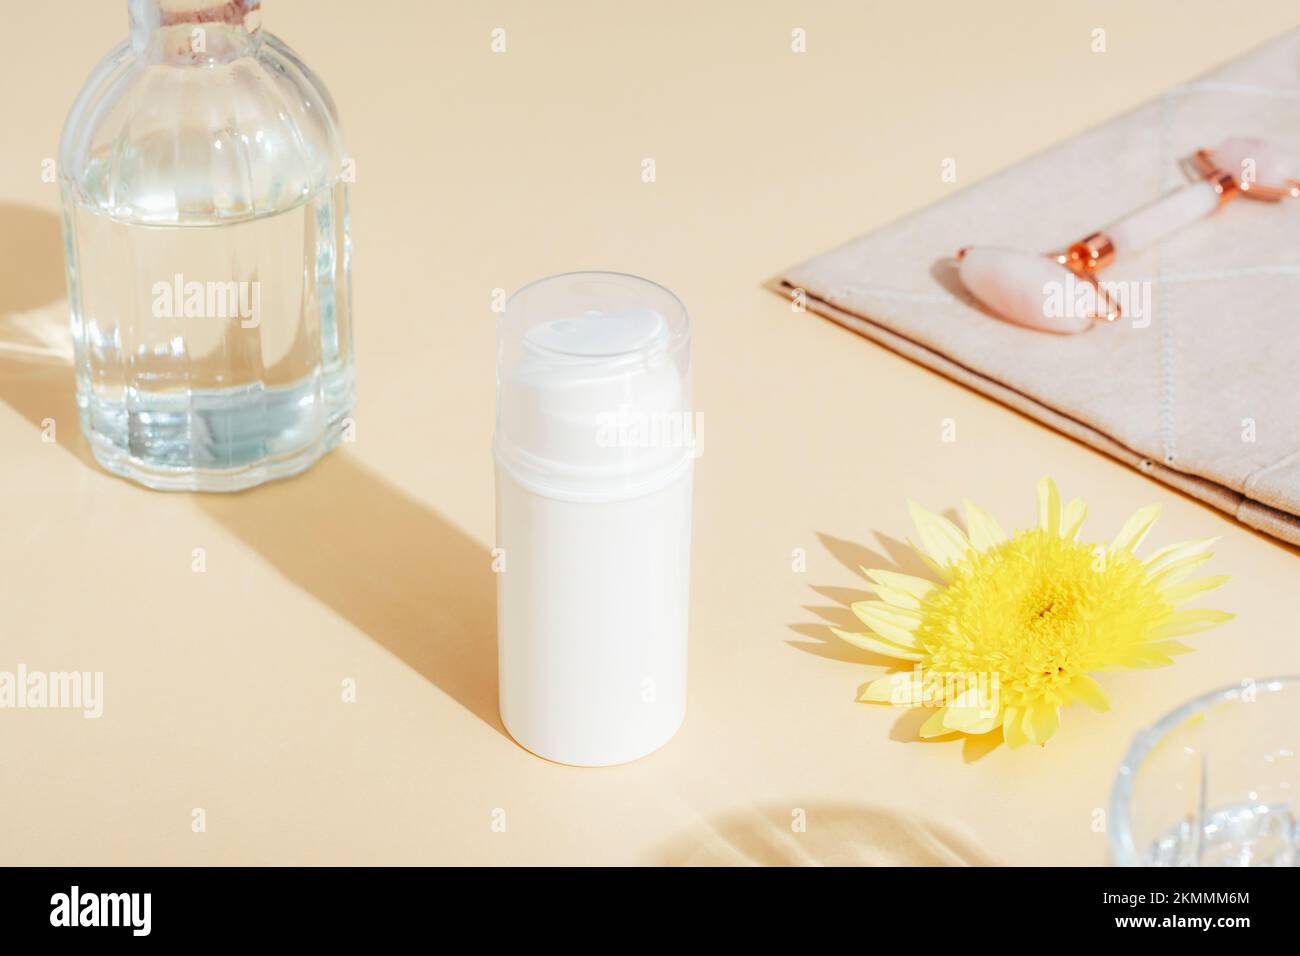 White cosmetic bottle, yellow flower and facial roller on beige background in sunlight. Skincare, spa and wellness concept. Selective focus. Stock Photo